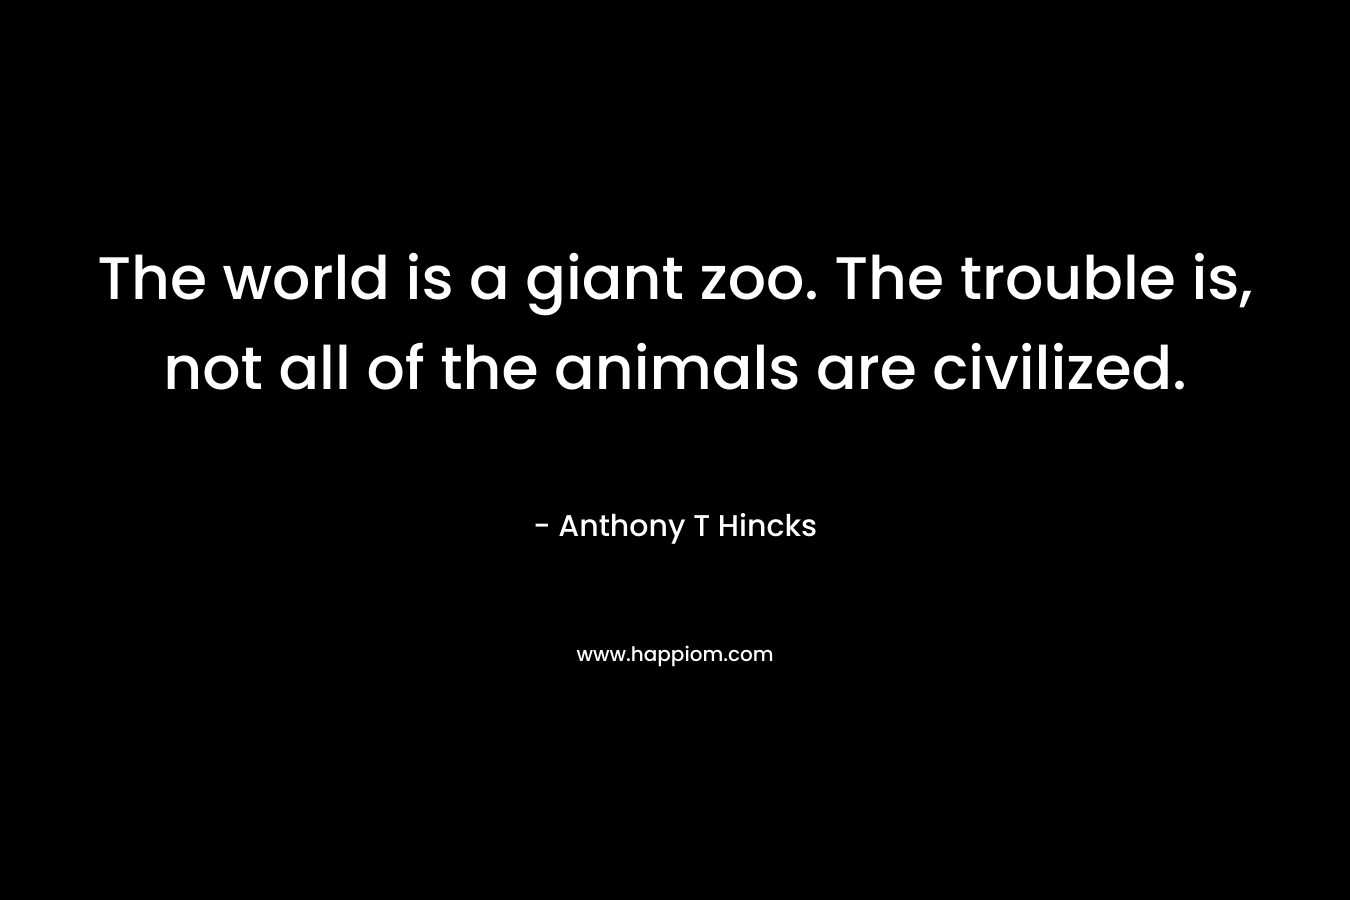 The world is a giant zoo. The trouble is, not all of the animals are civilized.